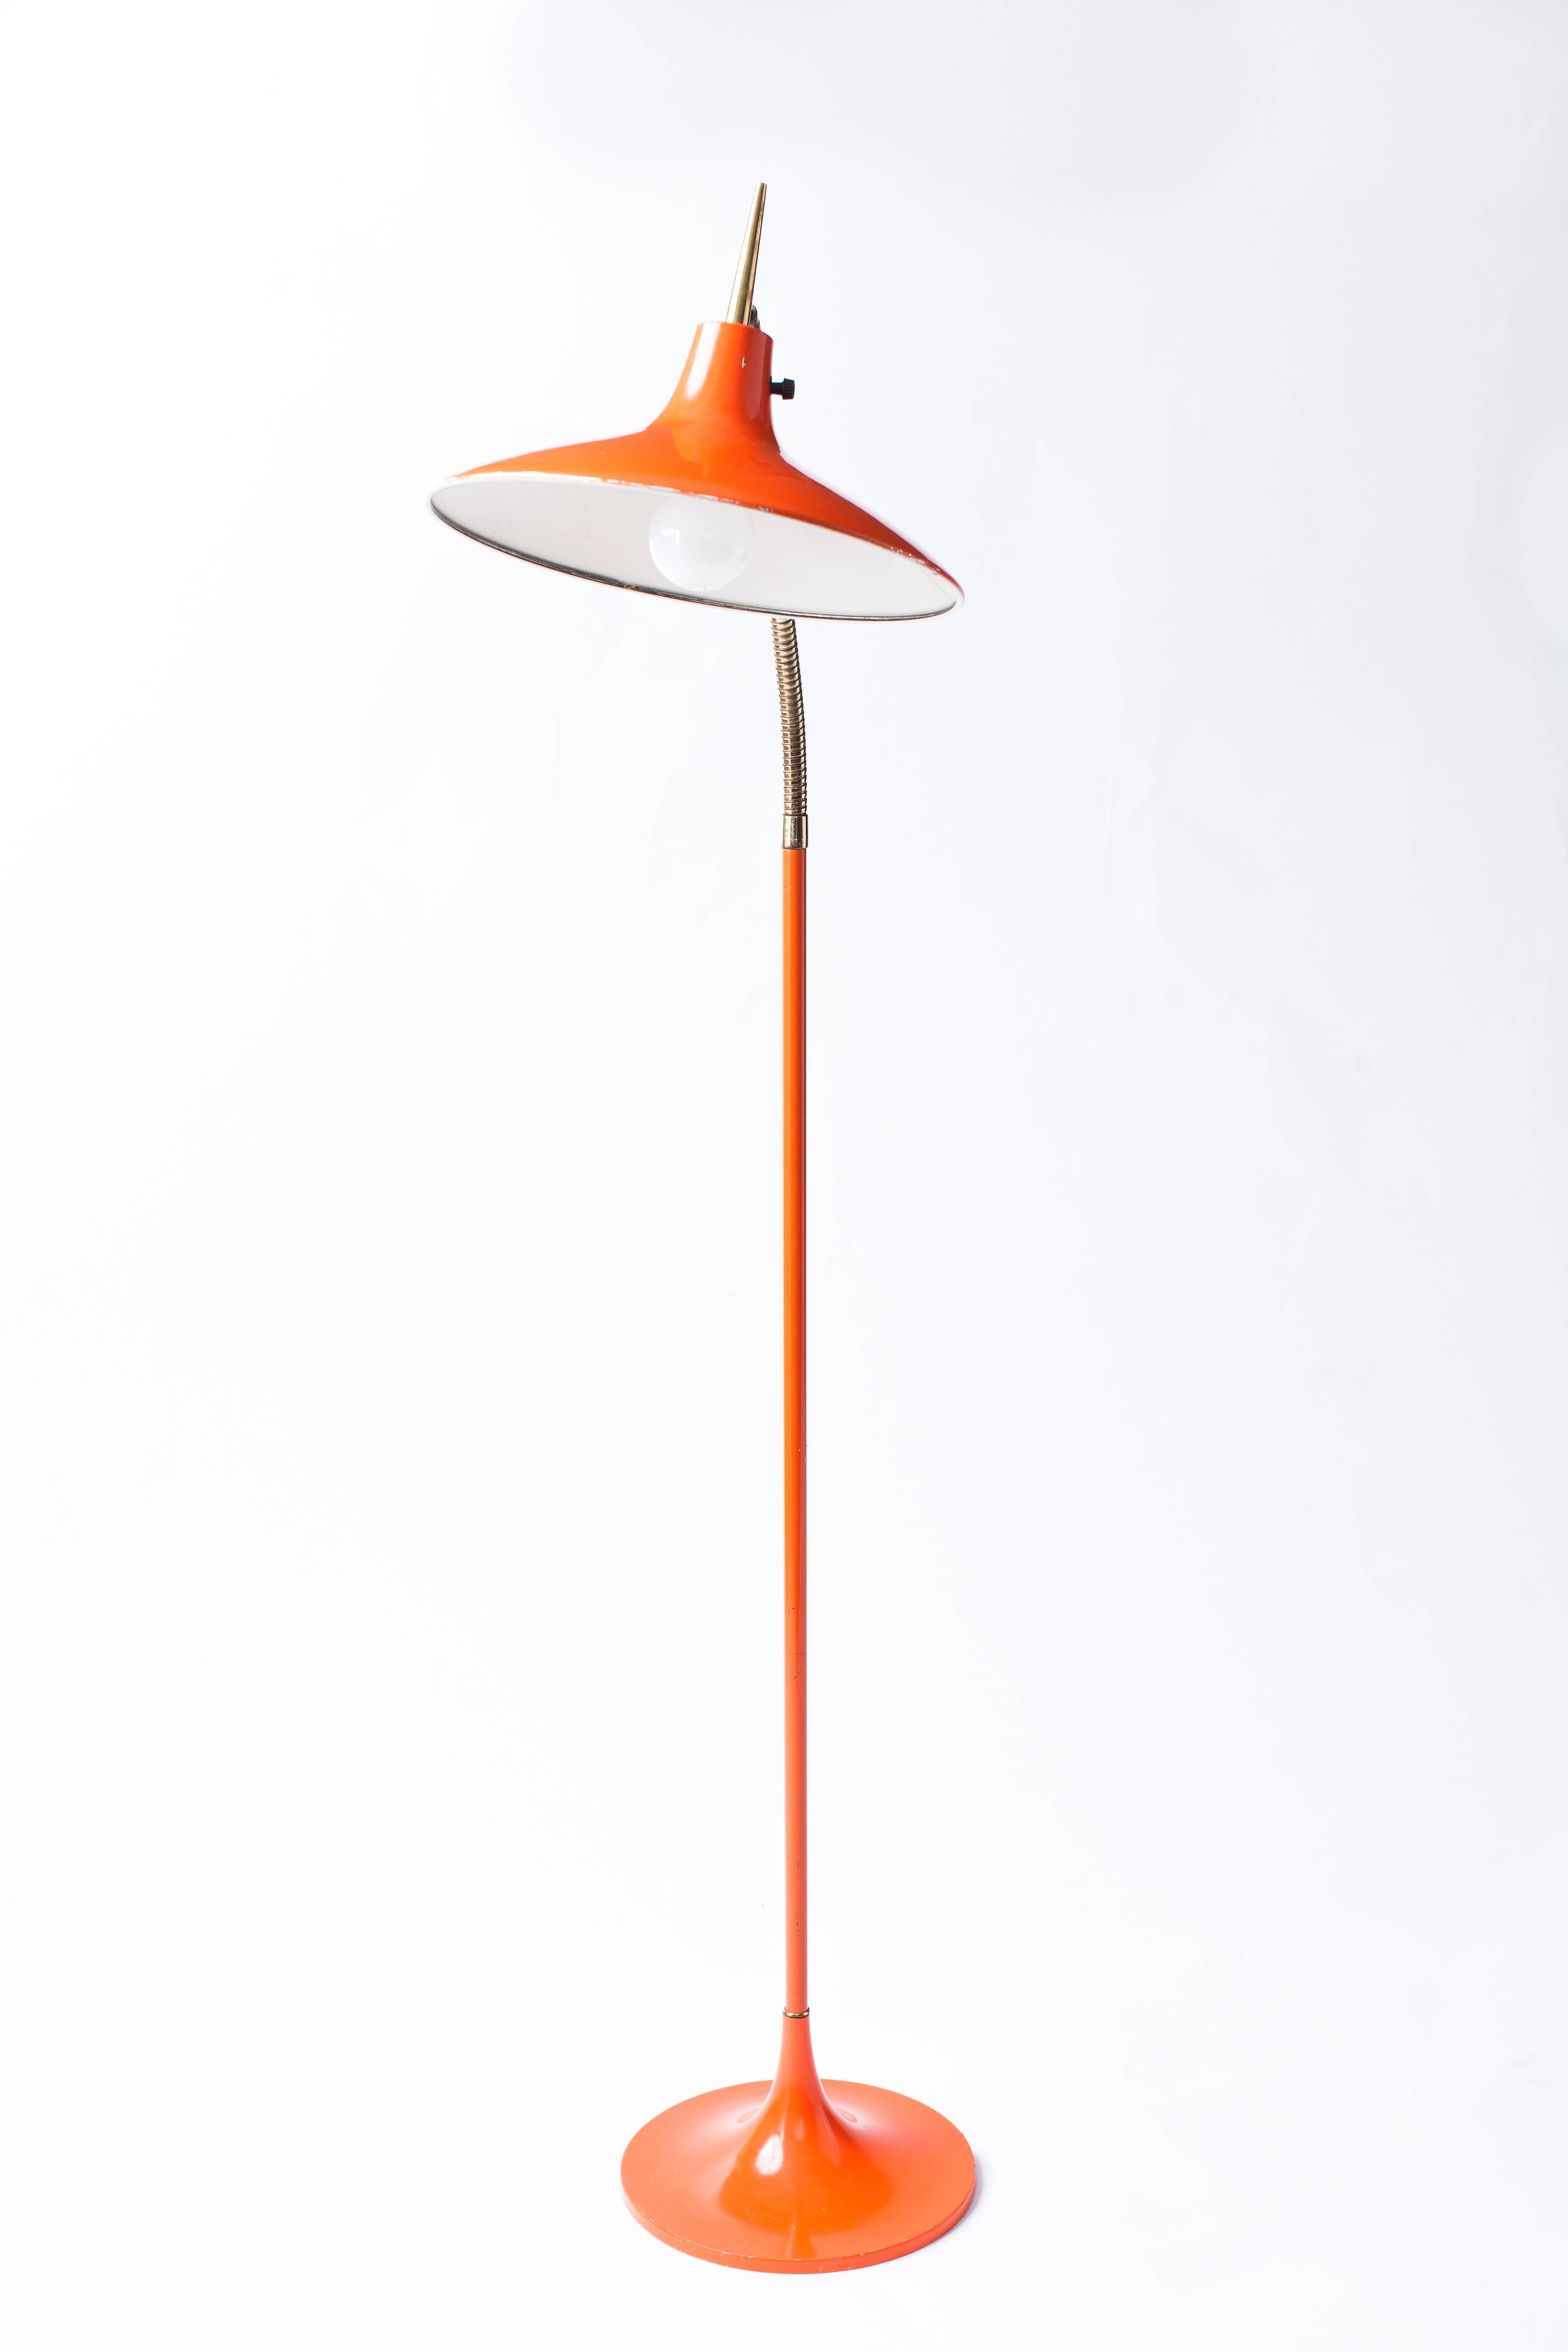 Graceful and sleek Mid-Century Modern floor lamp for Laurel, in the style of Gio Ponti, with an articulated brass gooseneck and adjustable shade, enameled in a warm, deep orange.